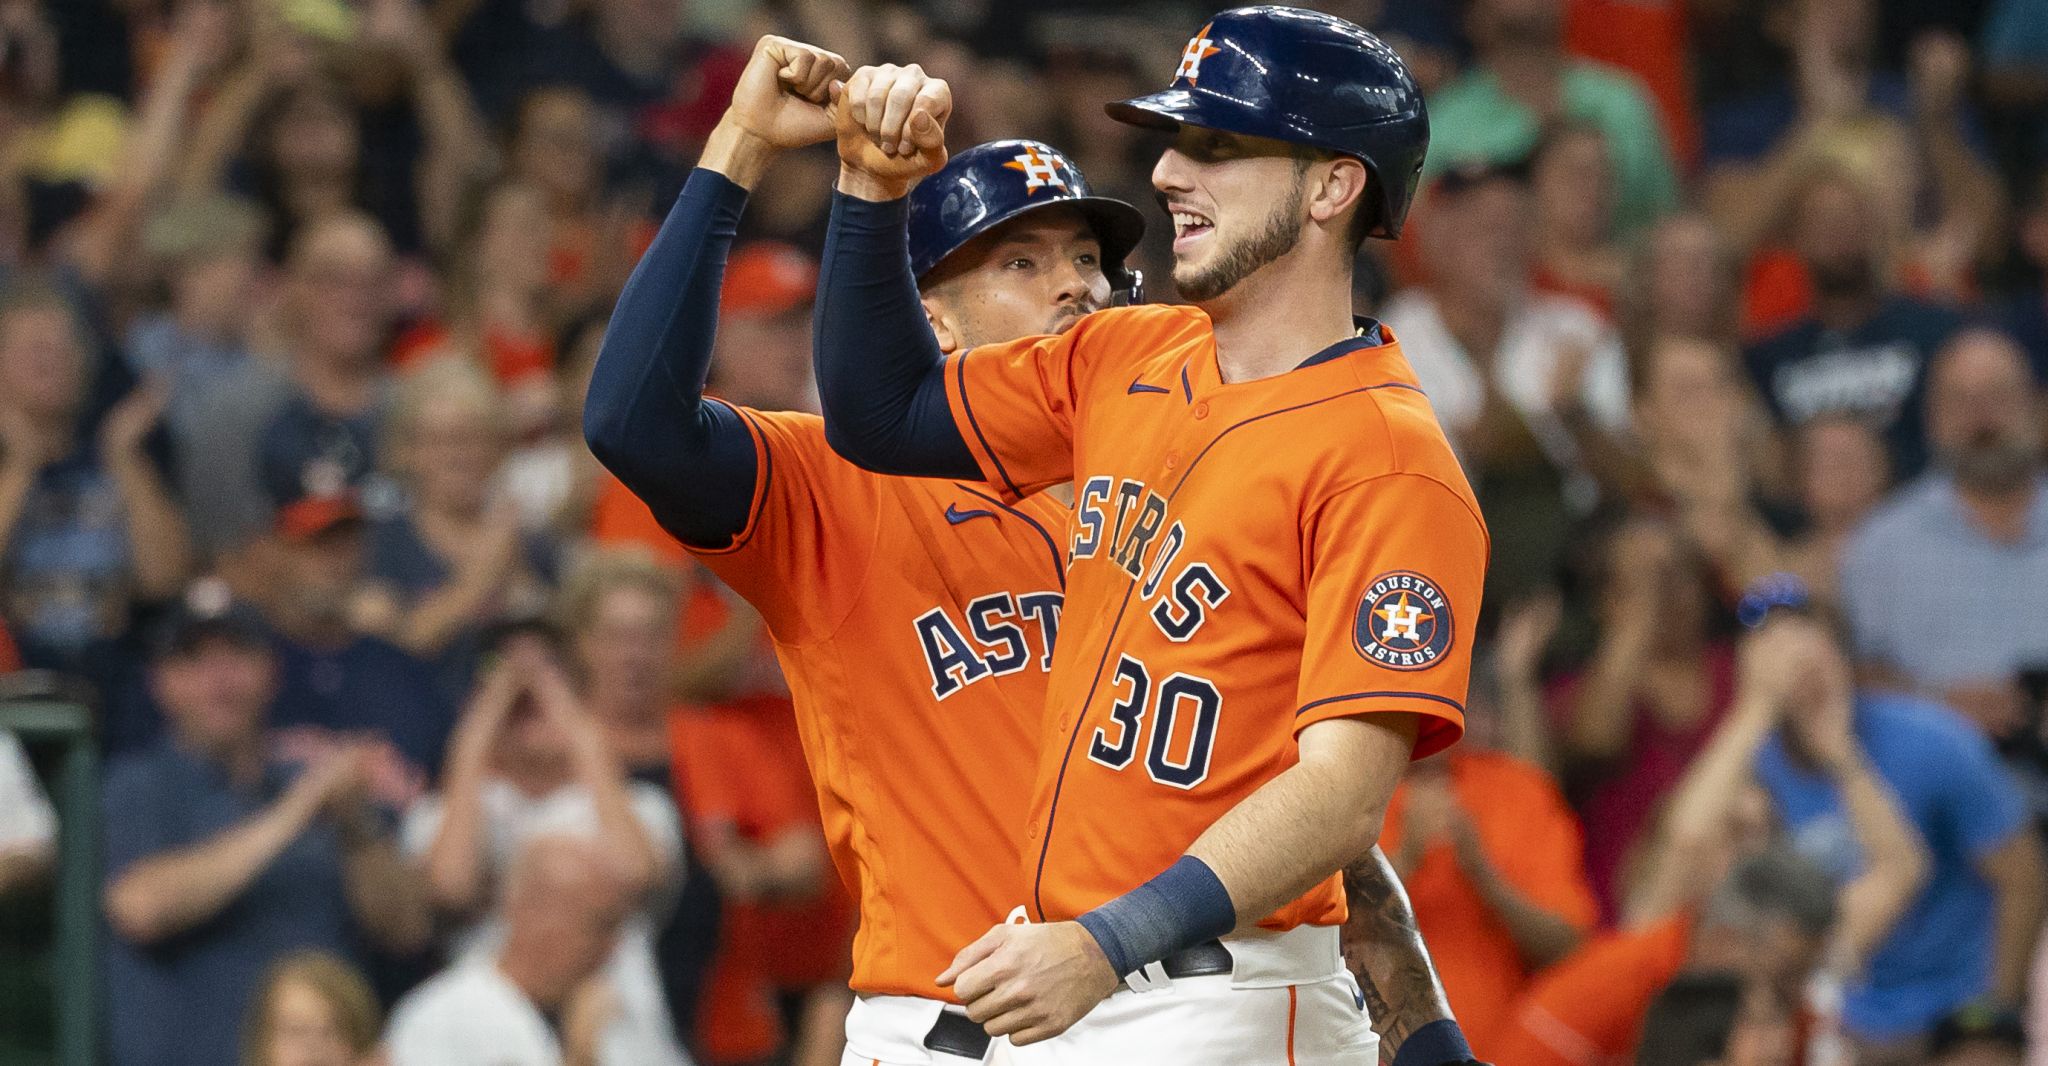 astros home jersey